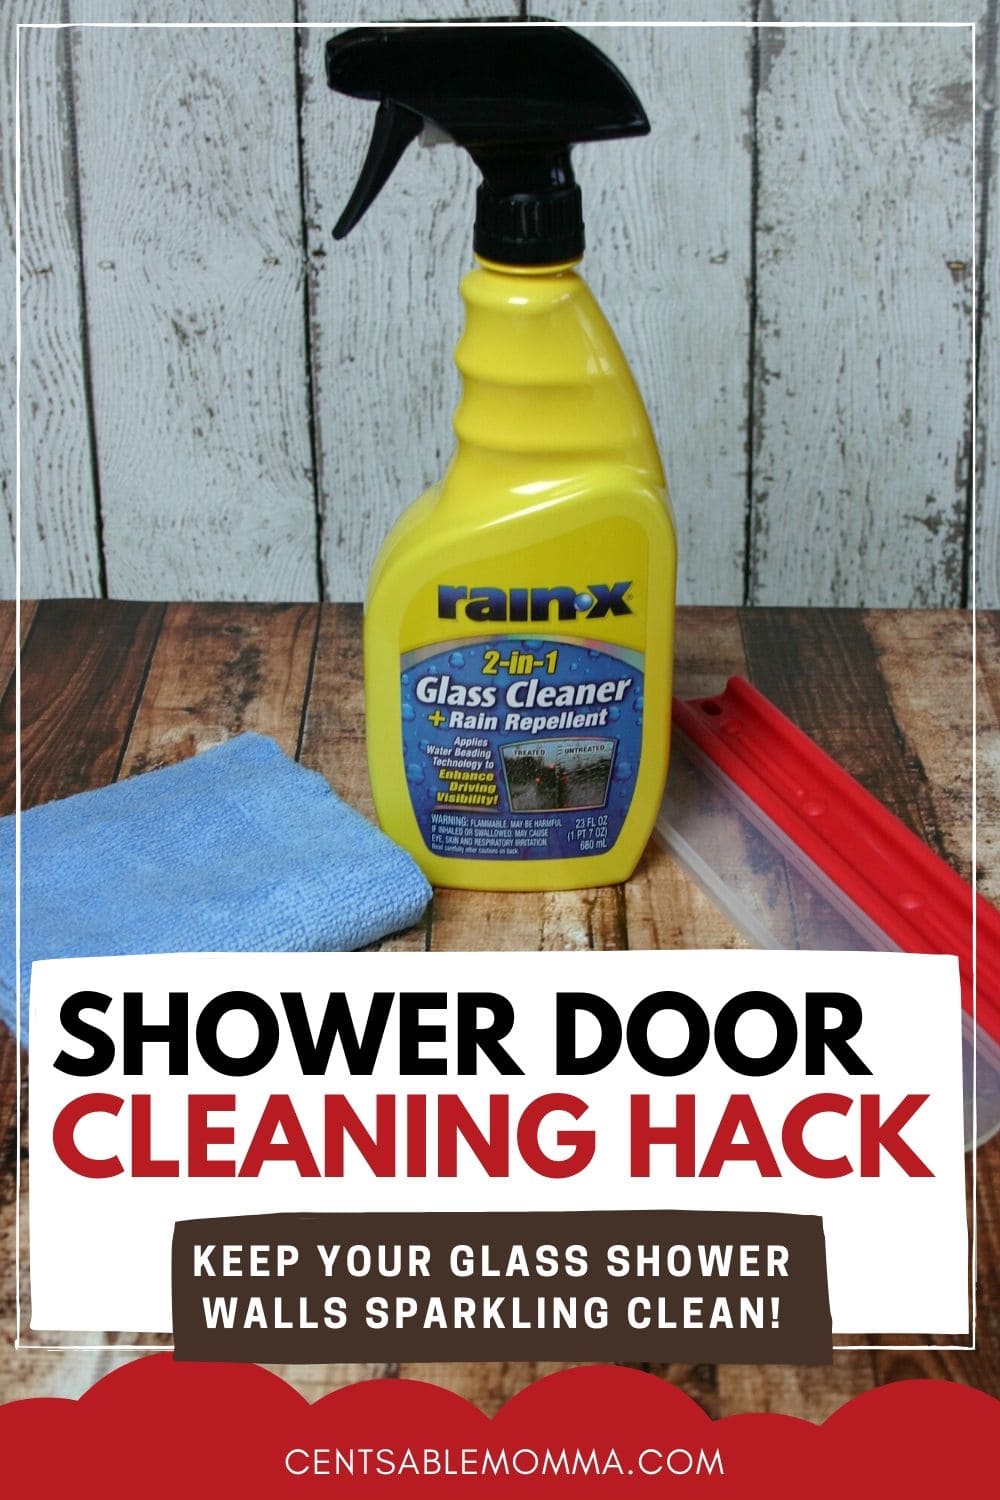 Rain-x to Keep Your Shower Glass Clean - Centsable Momma